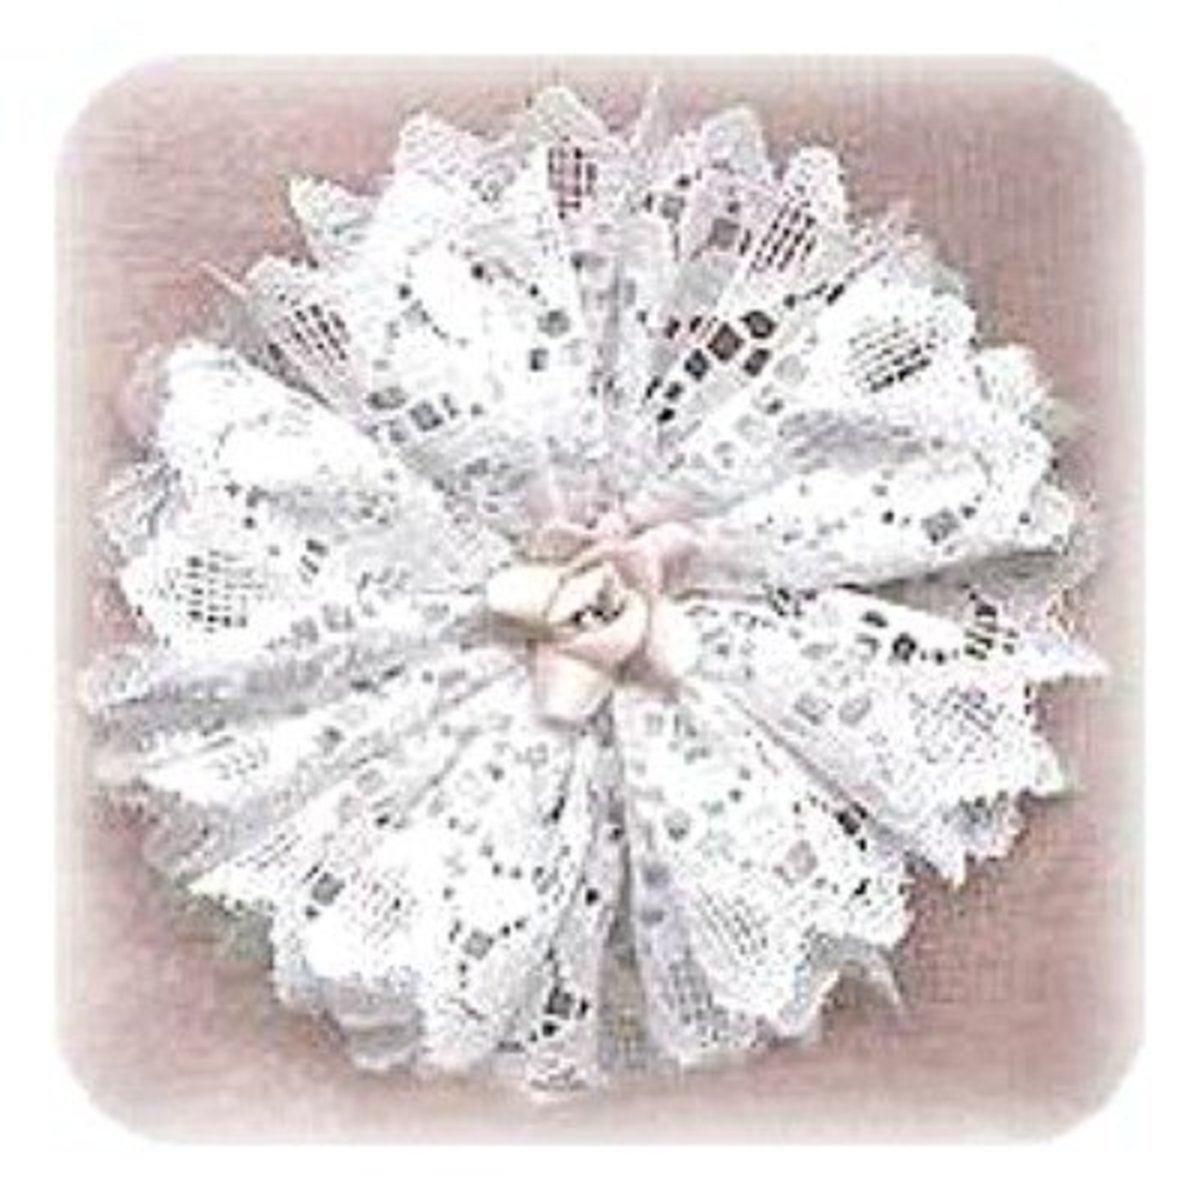 3 Victorian Lace Doily Star Bows Cream Christmas Tree Holiday Ornaments NEW 5.5” 